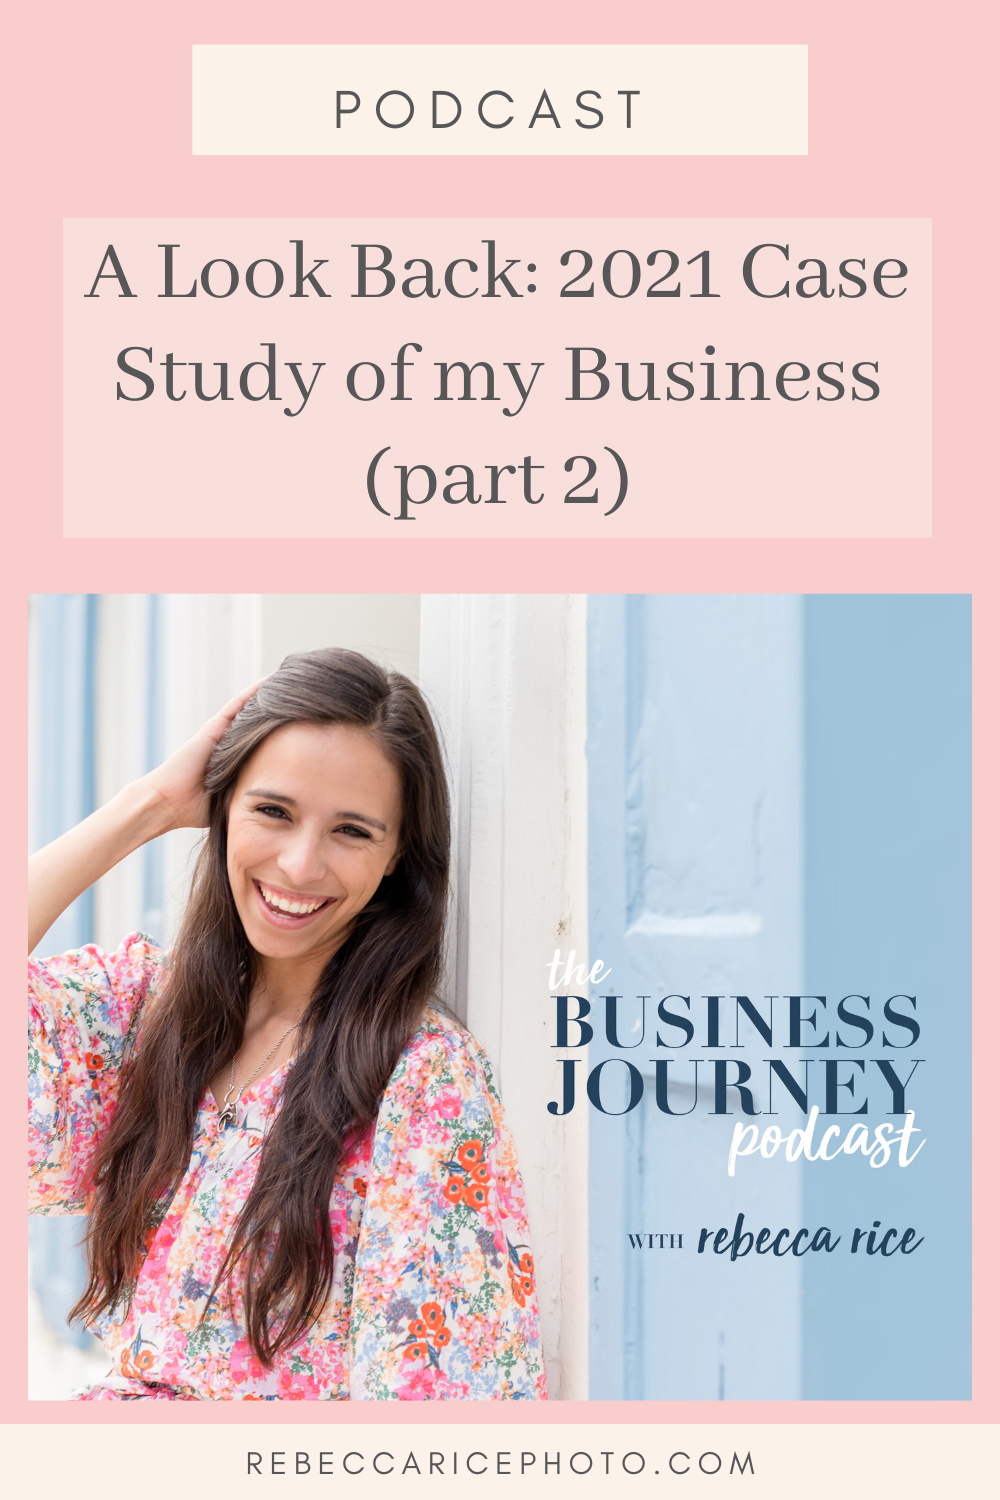 Going Full-Time in Business: A Case Study of Rebecca Rice Photography in 2021 as she and her husband went full-time in the business